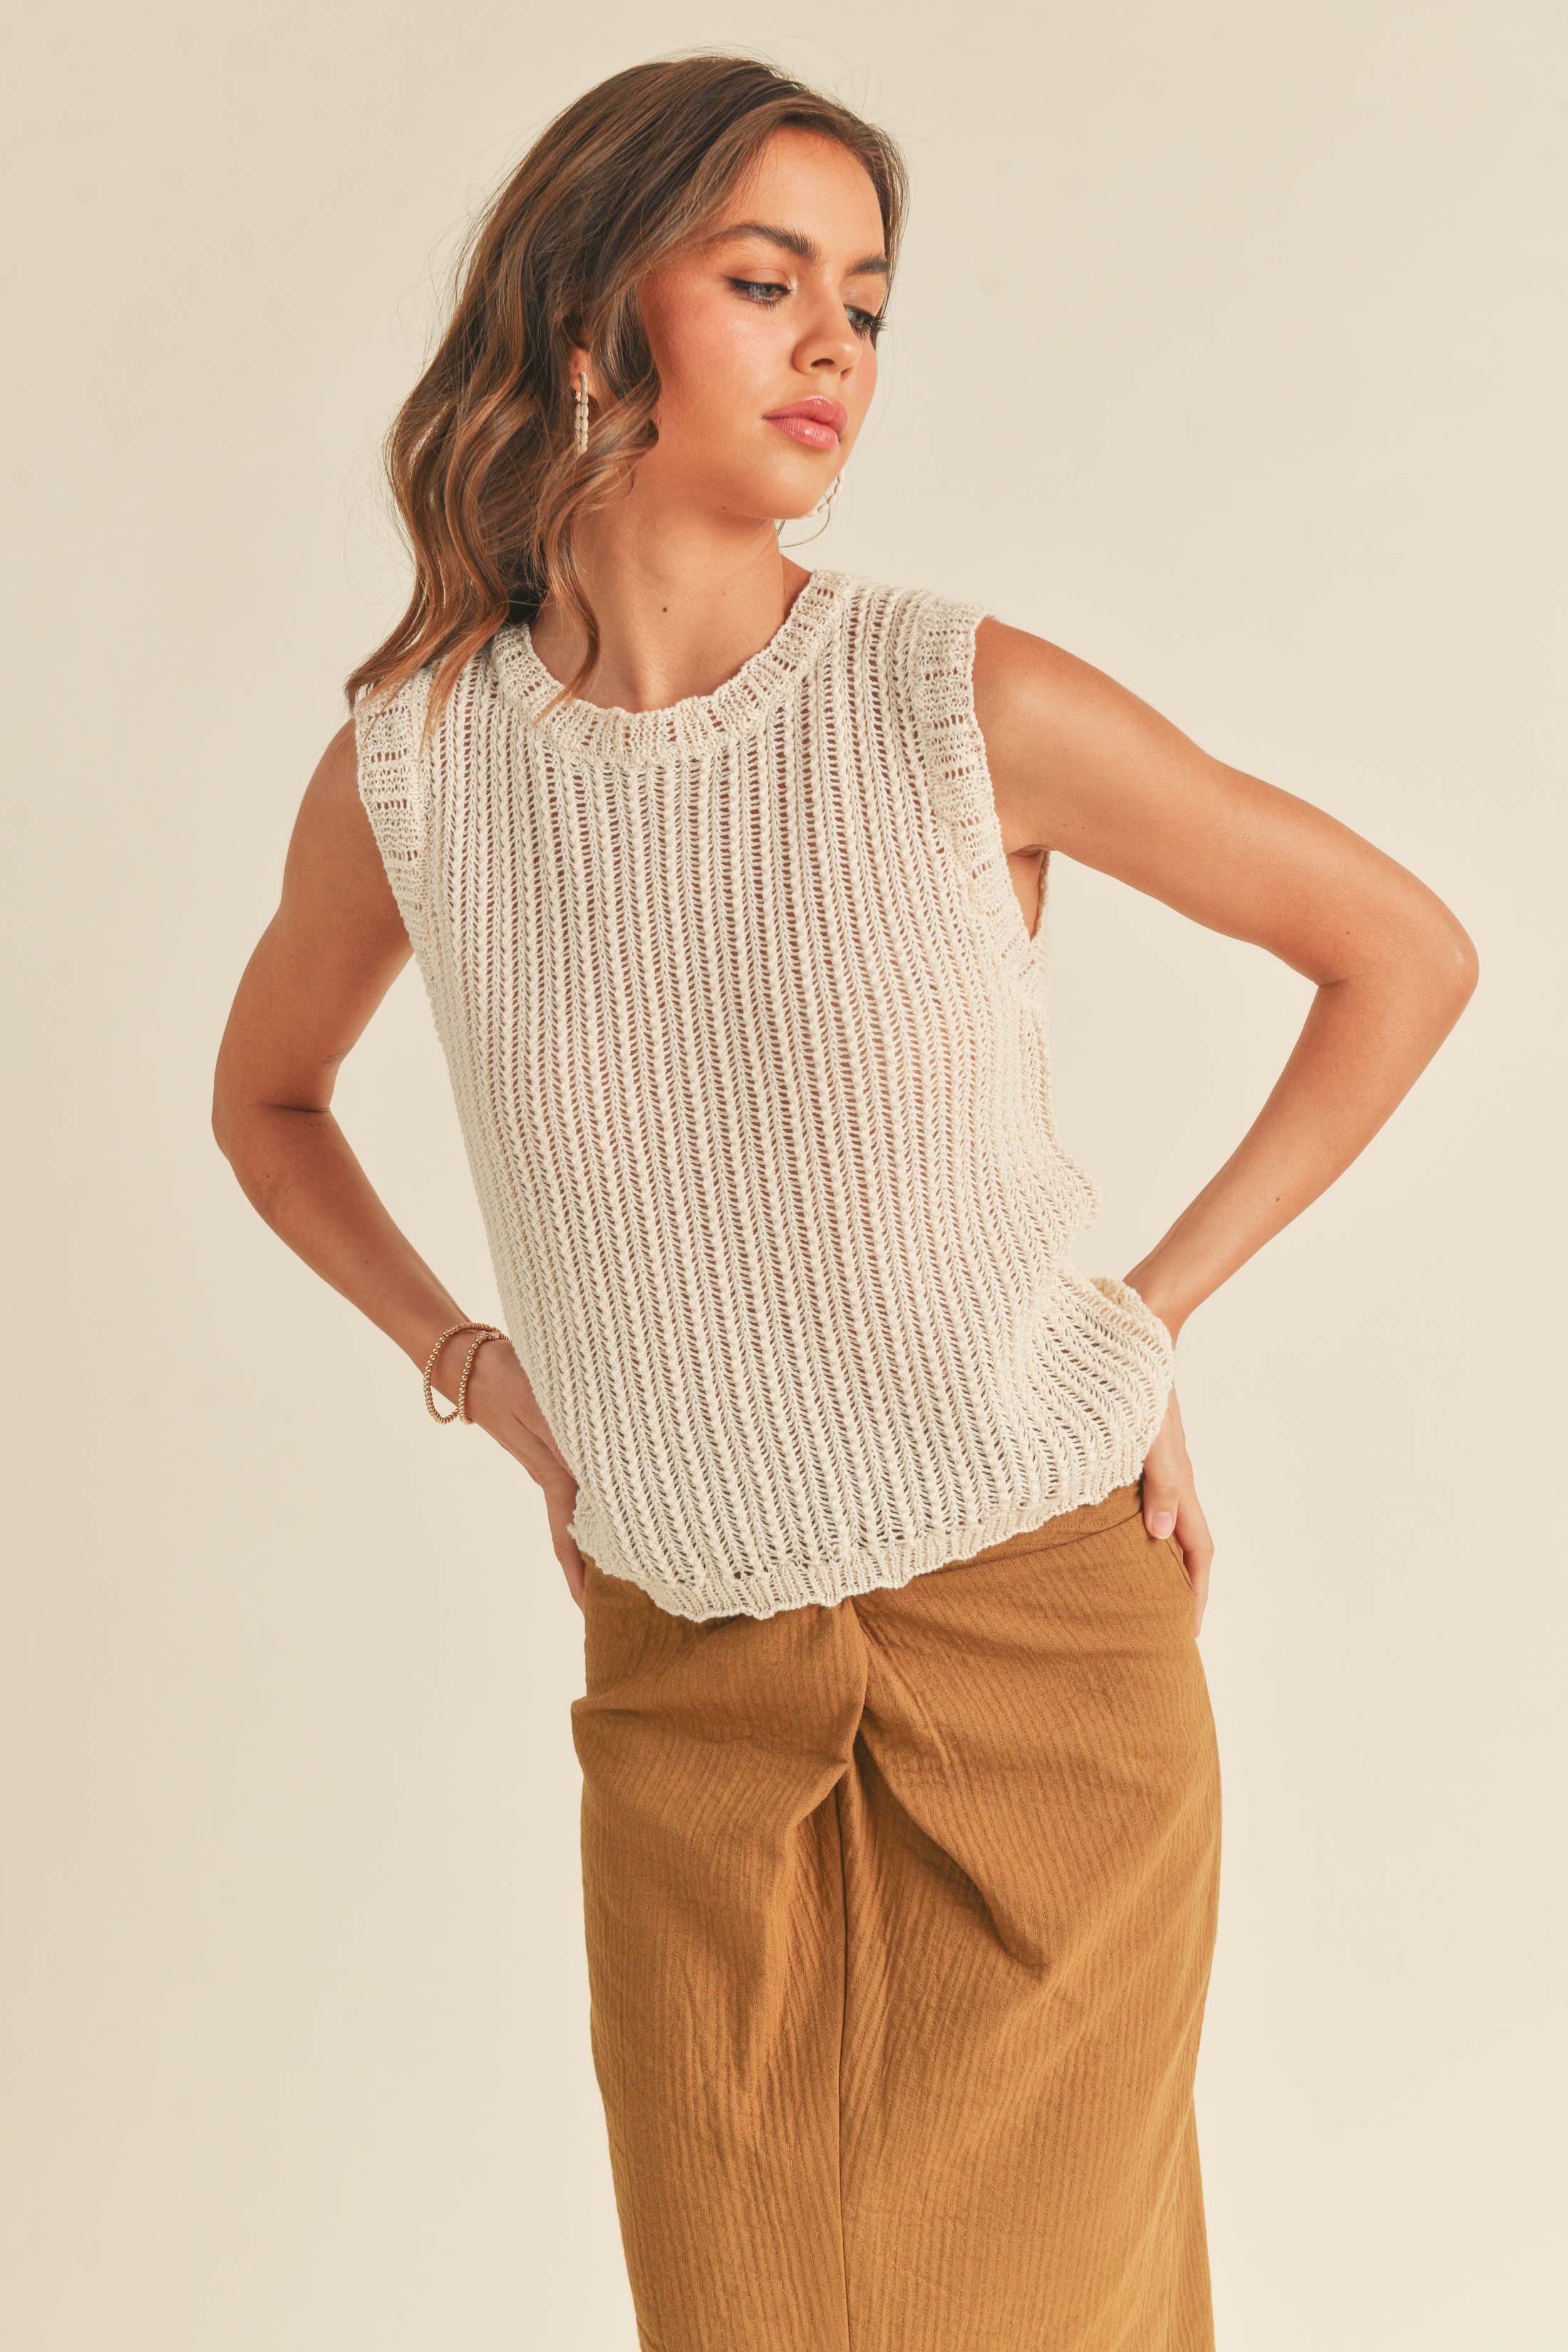 Everly - SLEEVELESS KNITTED TOP